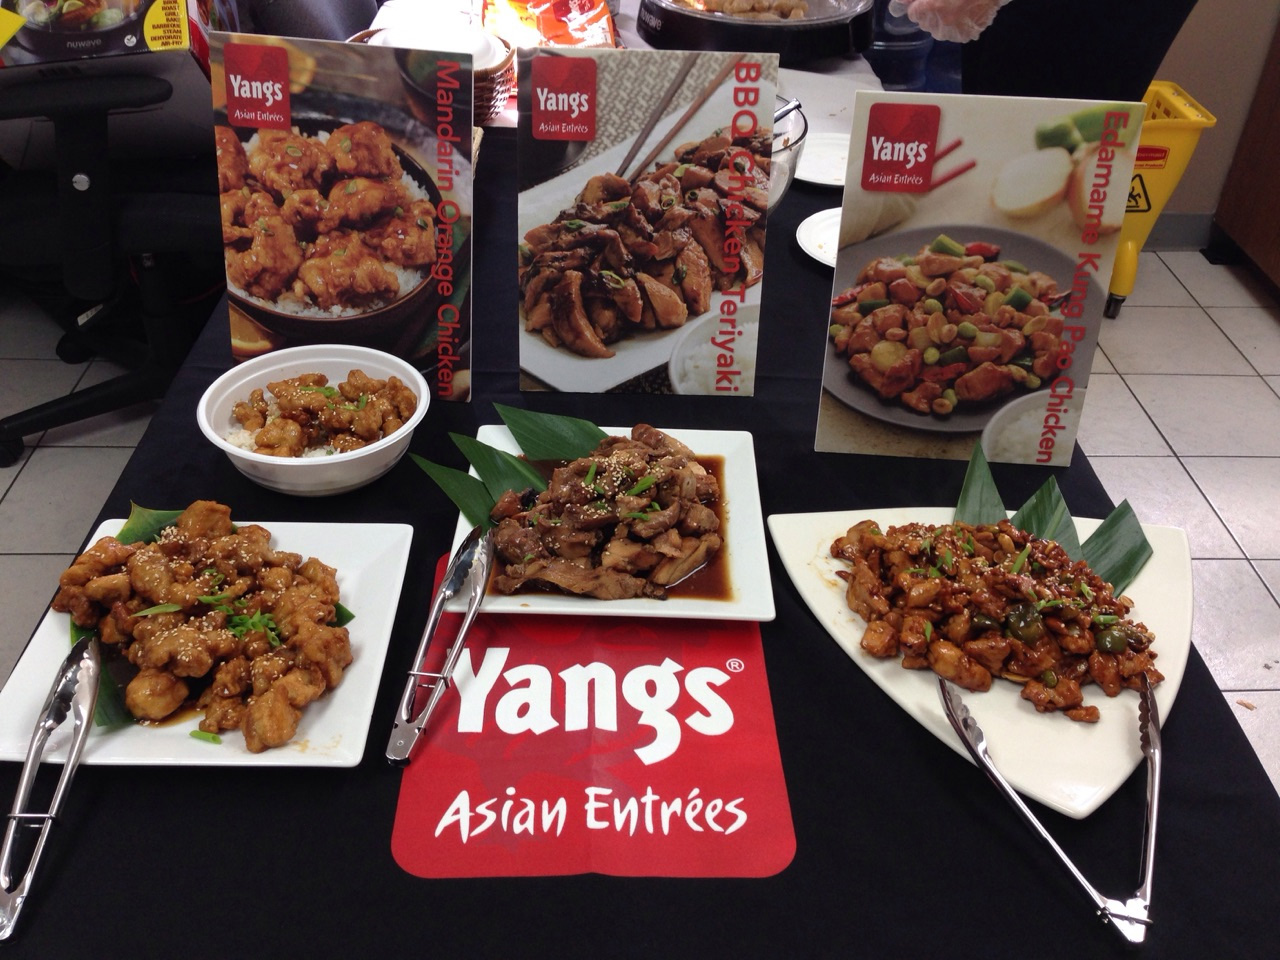 Delicious Food Items By Yangs Asian Entrees